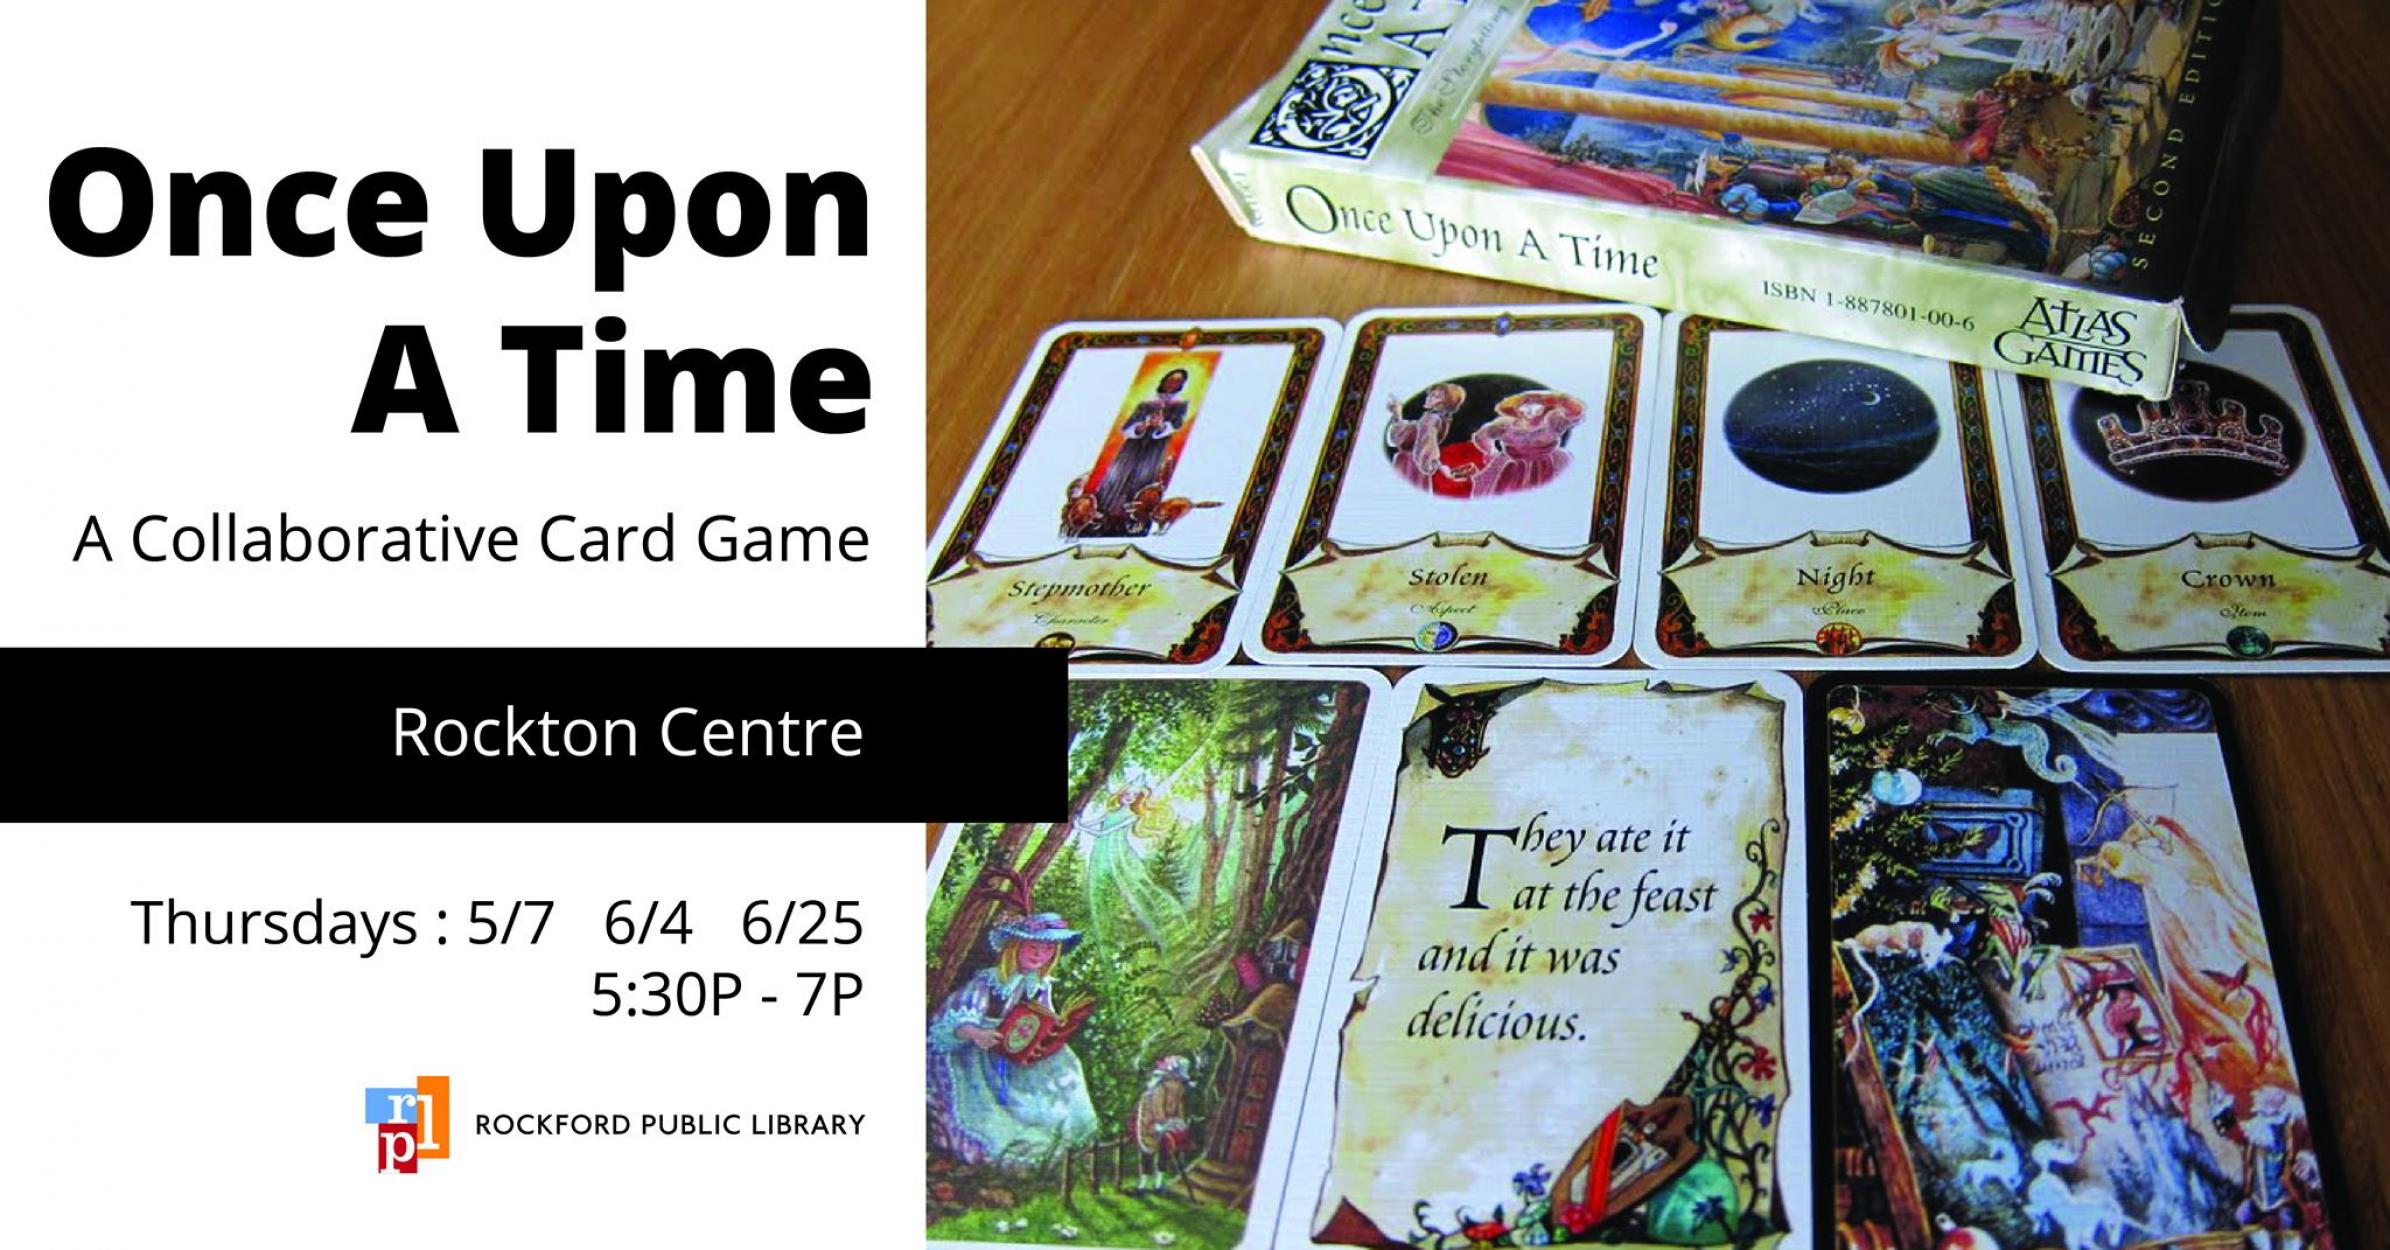 Once Upon a Time - A Collaborative Card Game